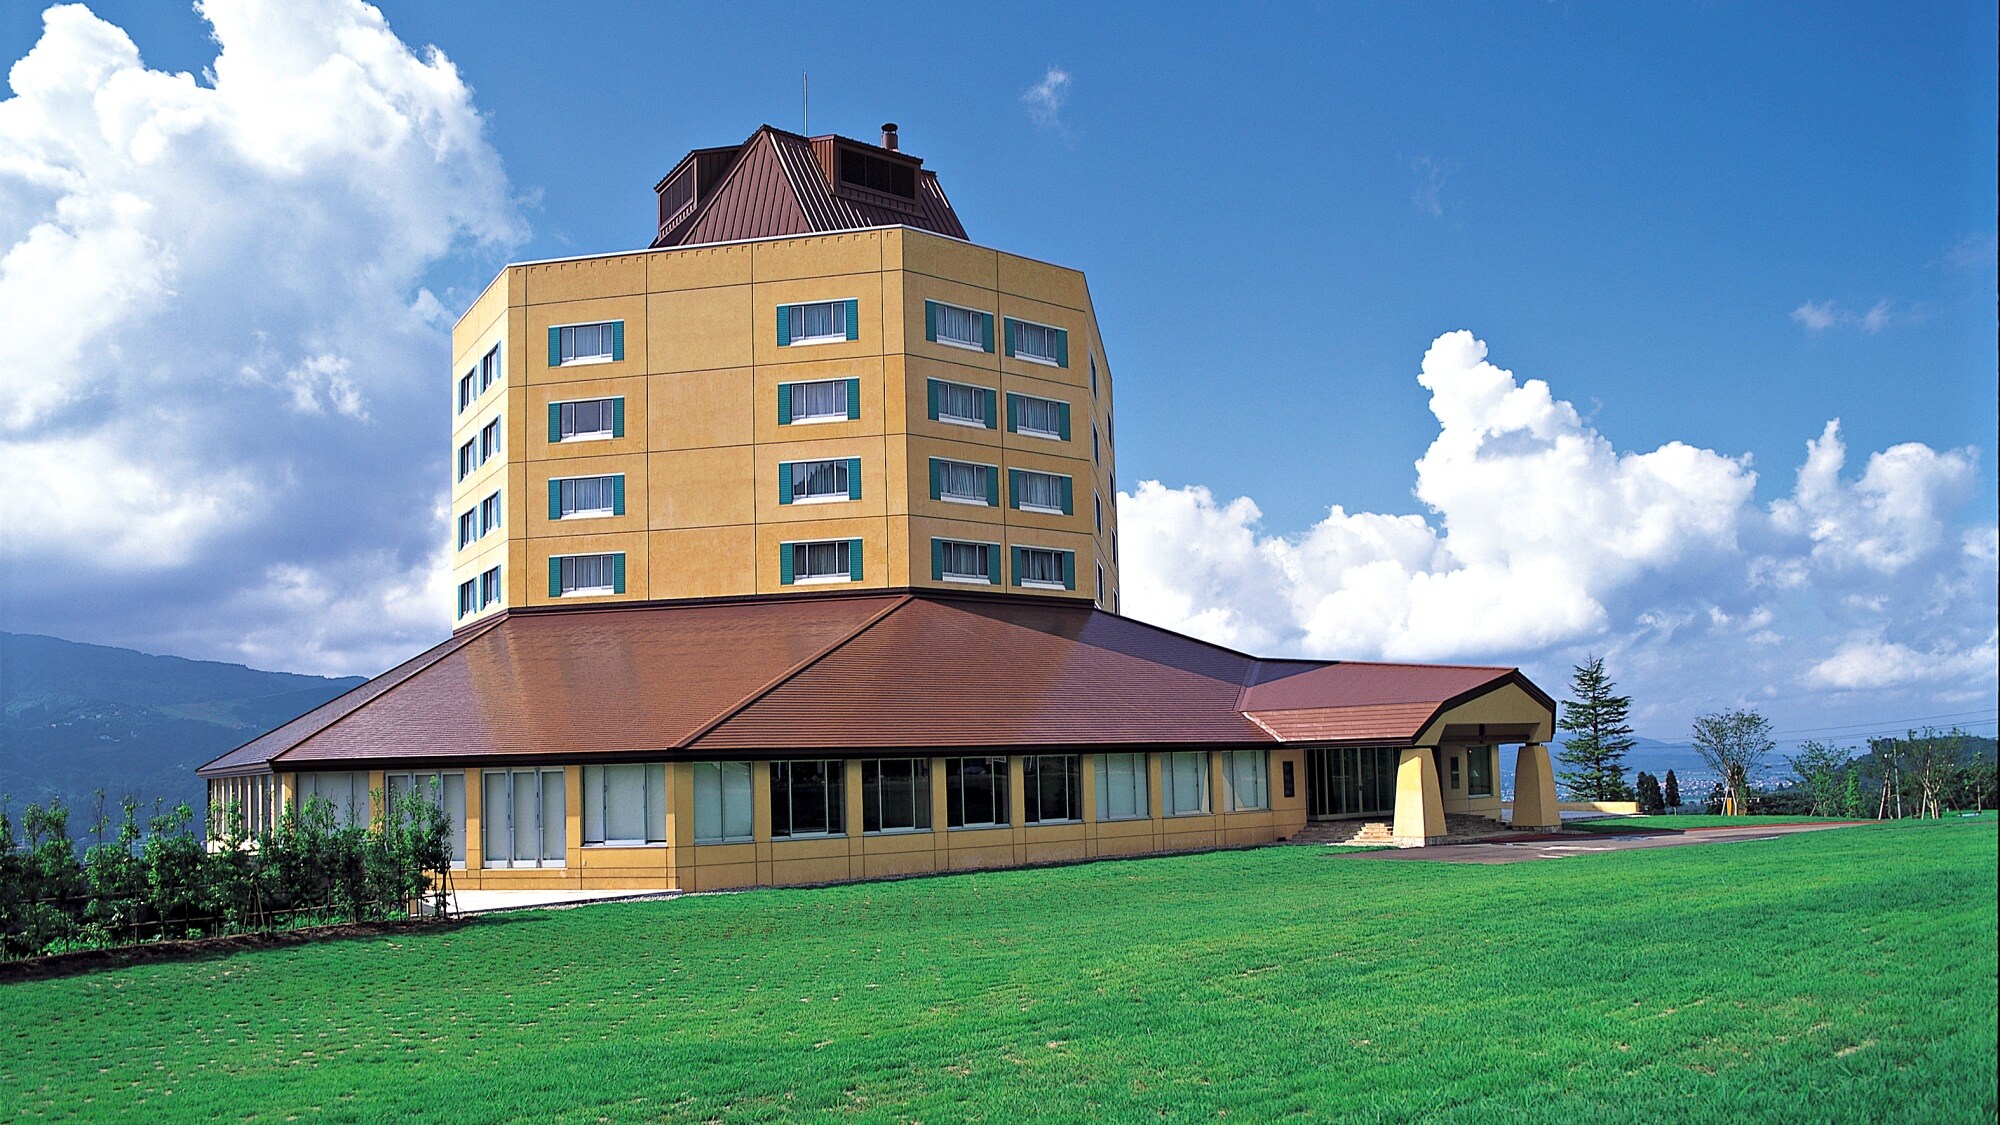 Exterior of the hotel (summer)